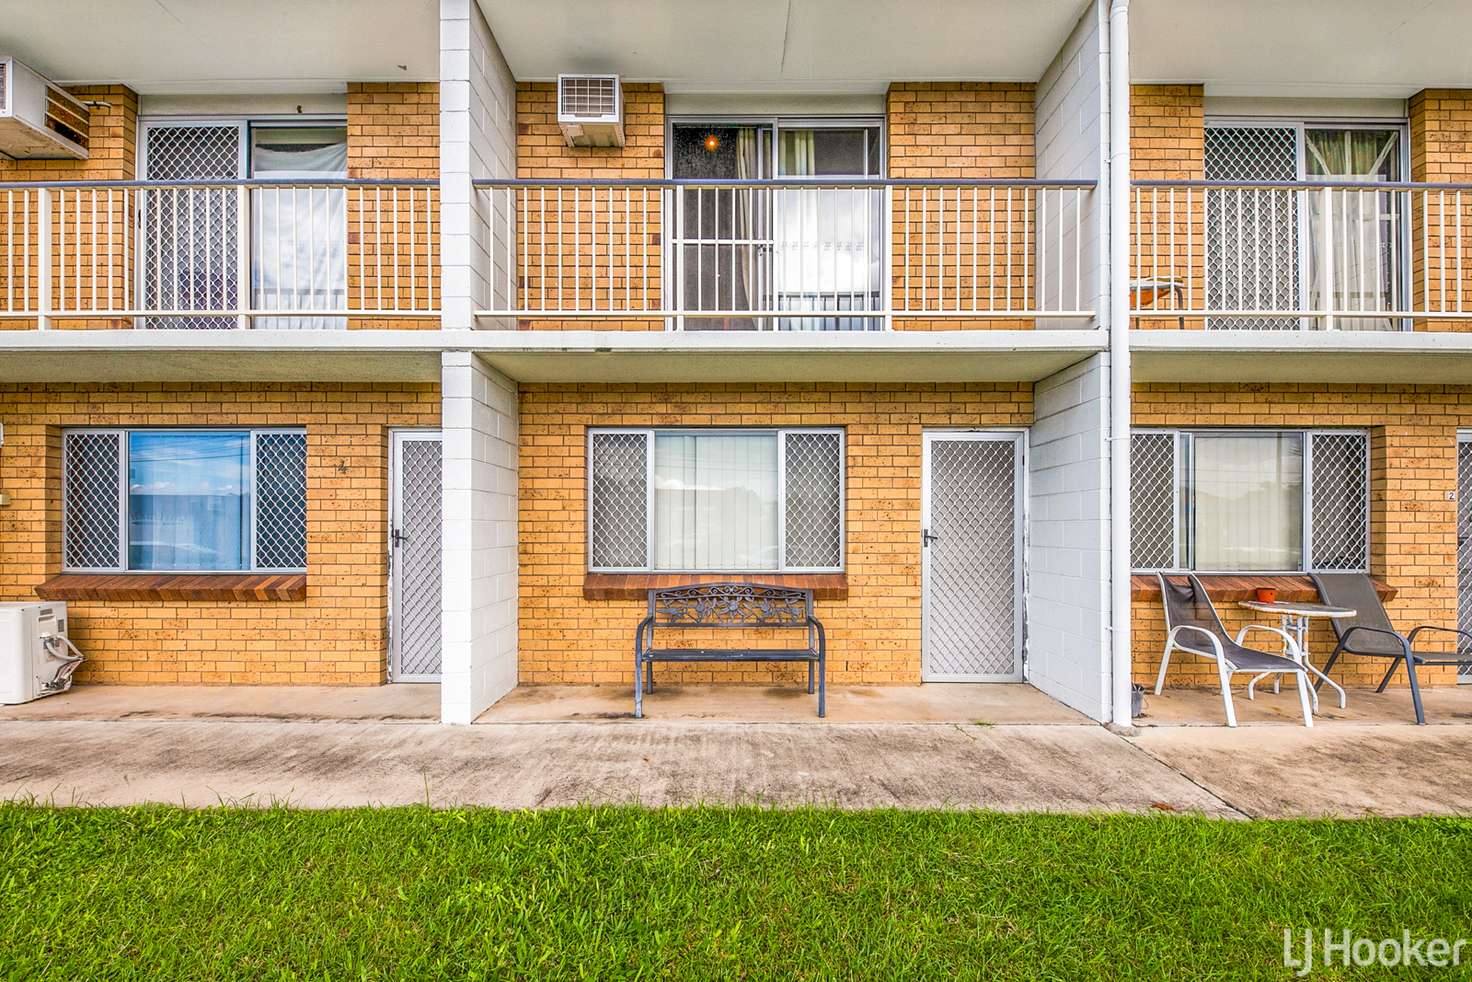 Main view of Homely unit listing, 3/200 Canning Street, The Range QLD 4700